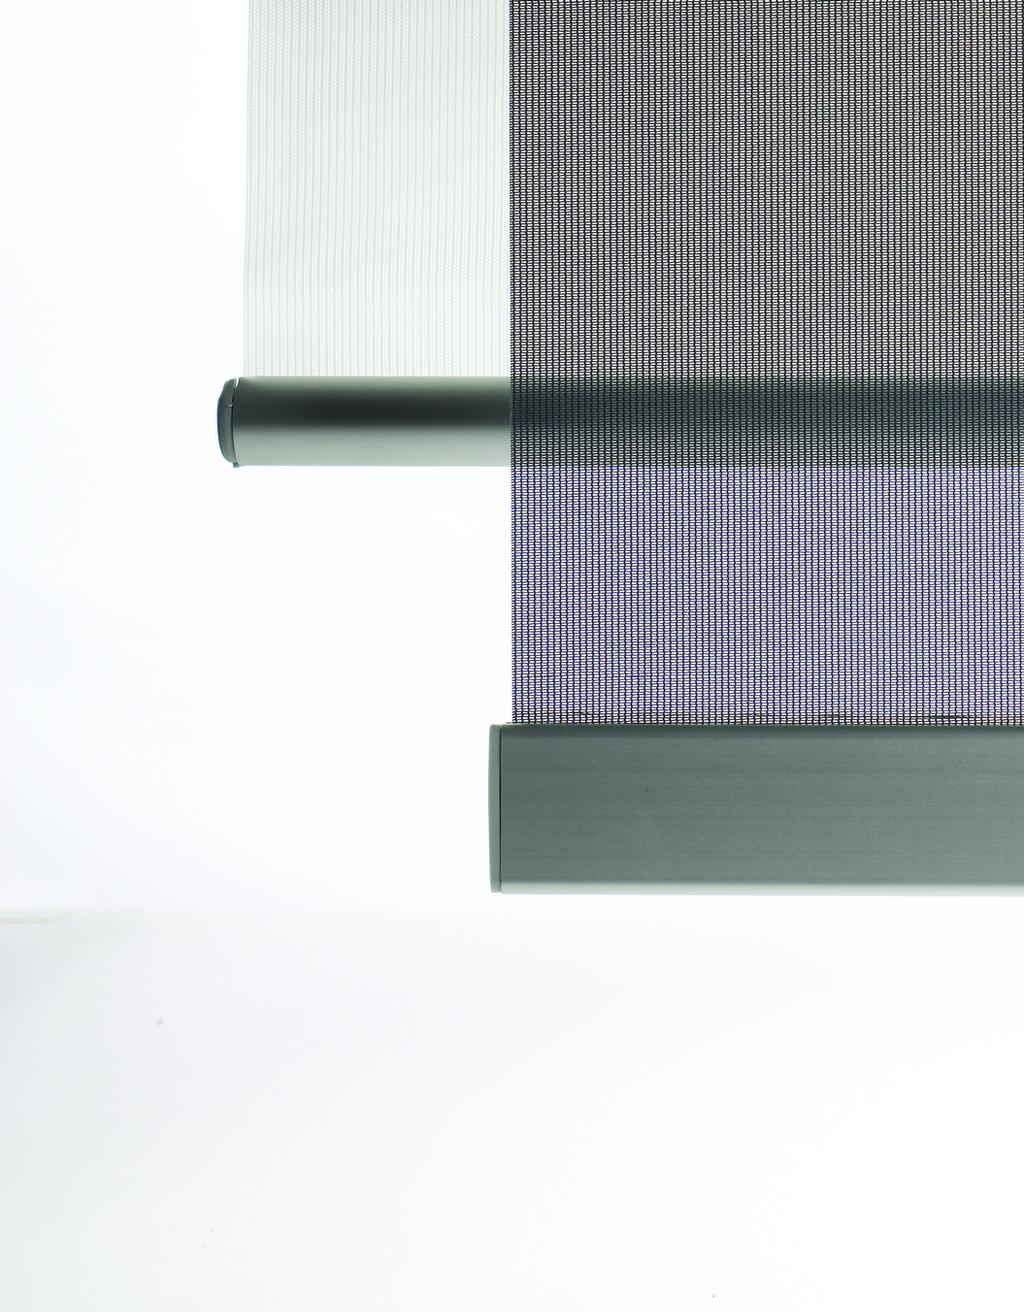 S H A D I N G FA B R I C S Recent advances in textile development have greatly increased the range of choices for high-performance shading fabrics.